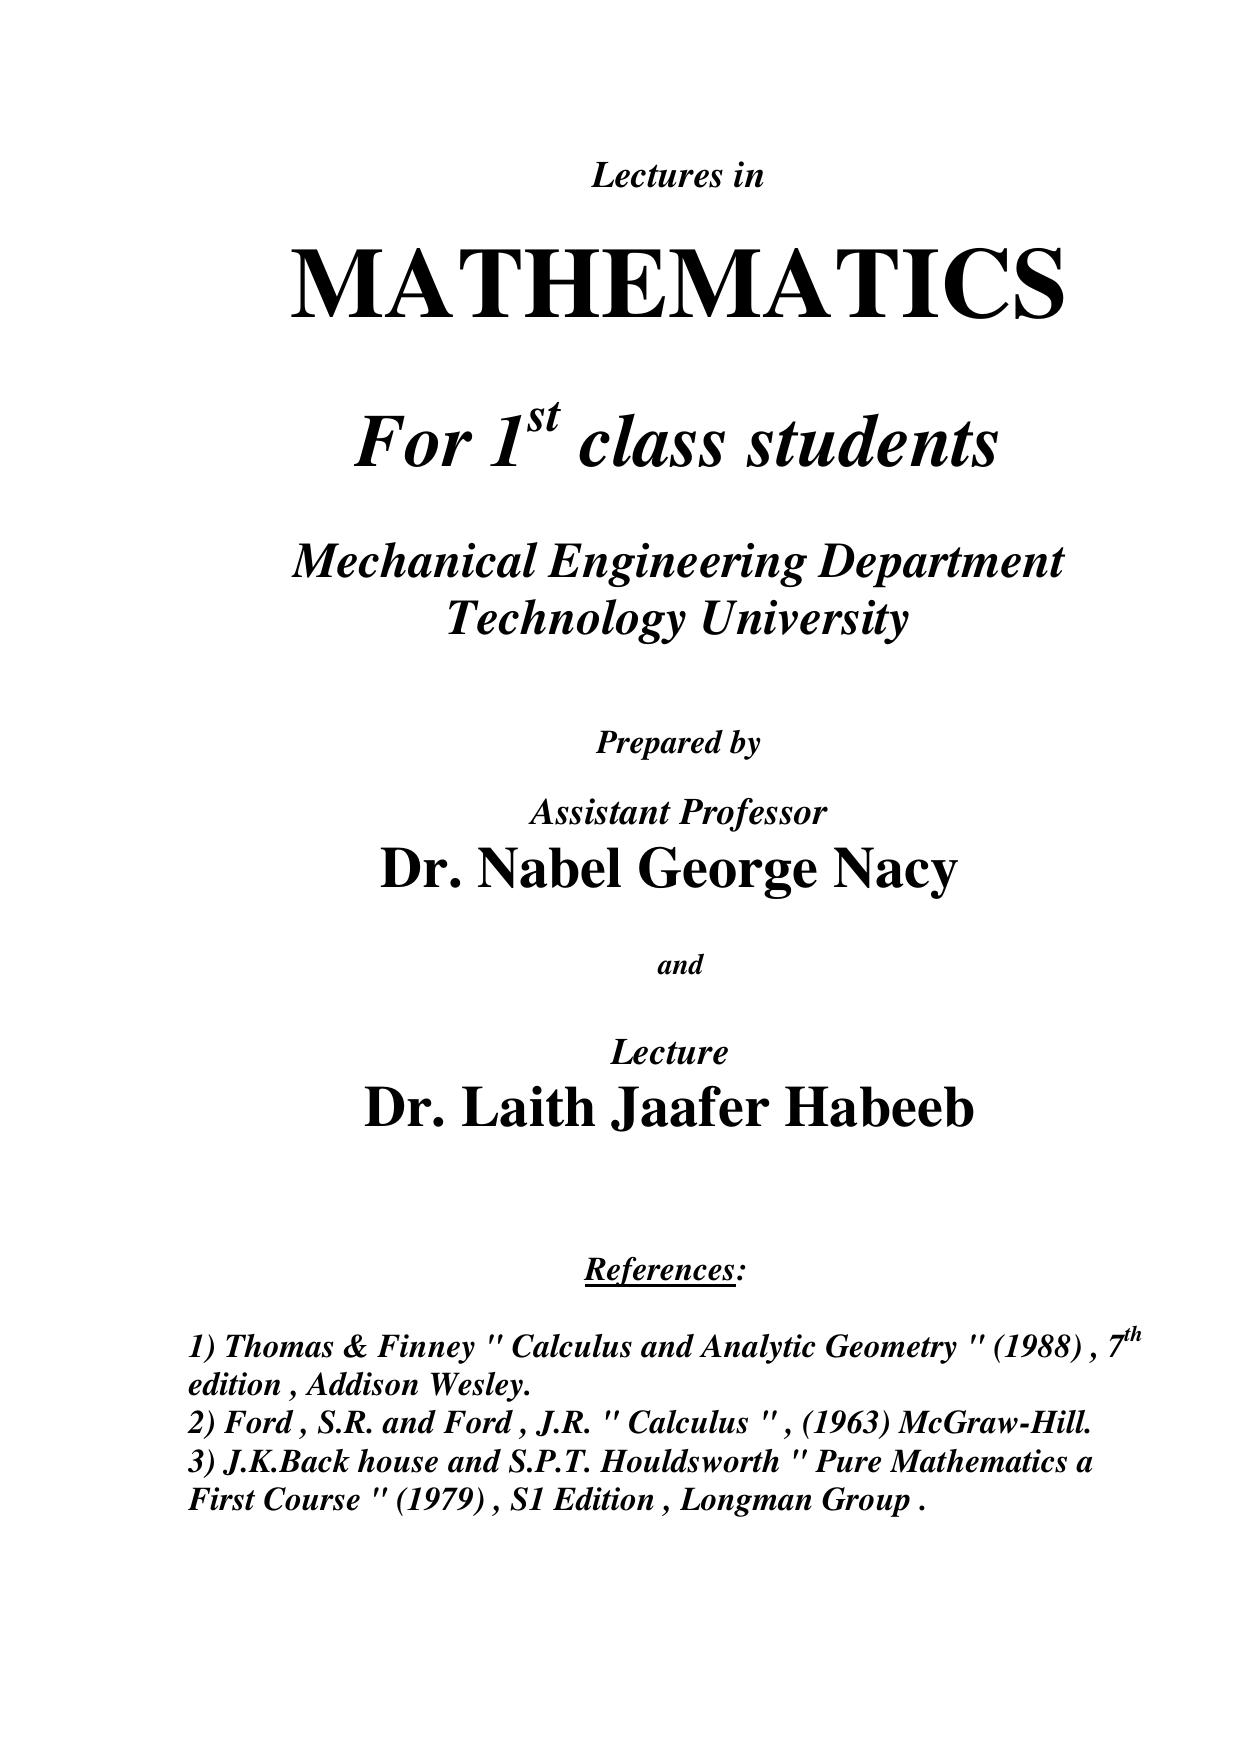 Lectures in Mathematics for 1st Class Students by Dr. Nabel George Nacy Dr. Laith Jaafer Habeeb